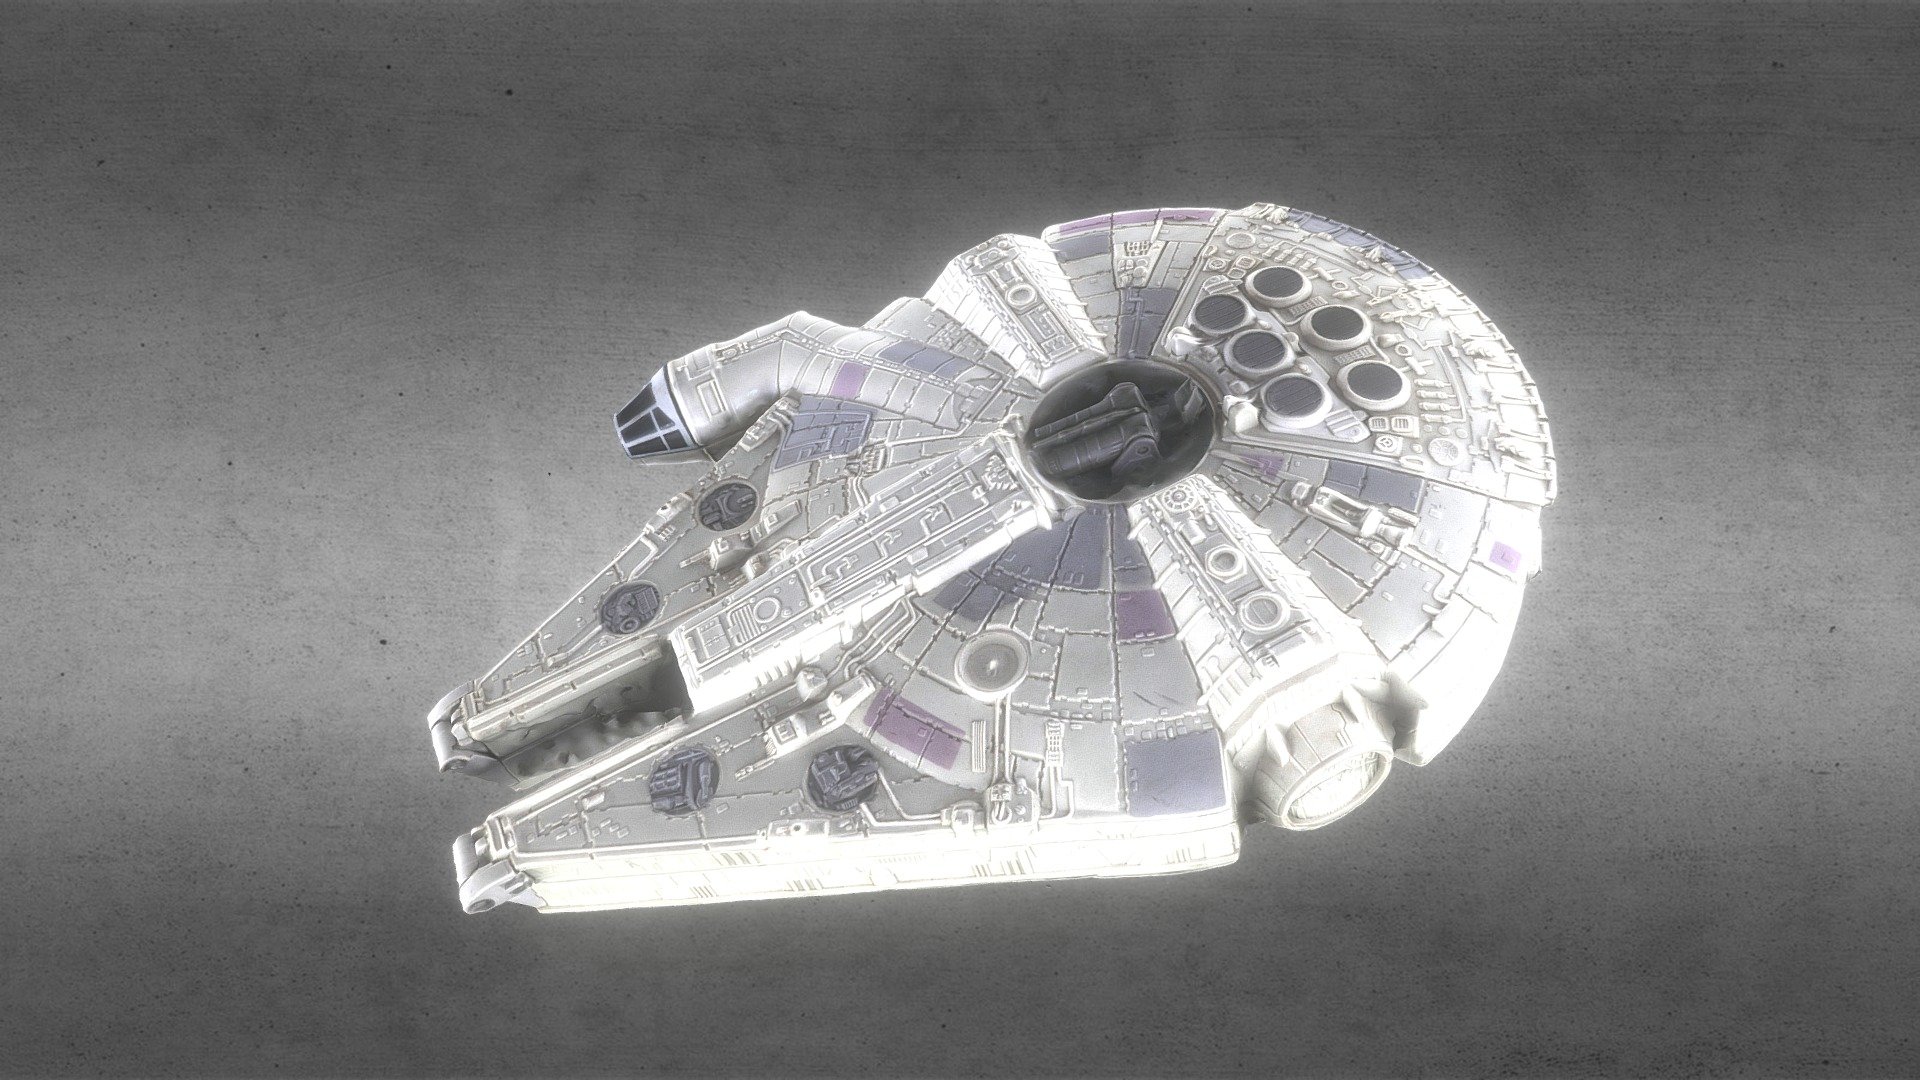 The Millennium Falcon is a fictional starship in the Star Wars franchise. Designed by Joe Johnston for the movie Star Wars (1977),[a] it has subsequently appeared in The Star Wars Holiday Special (1978), The Empire Strikes Back (1980), Return of the Jedi (1983), The Force Awakens (2015), The Last Jedi (2017), Solo: A Star Wars Story (2018), and The Rise of Skywalker (2019). The starship, or a similar one, also has a cameo in Revenge of the Sith (2005).[1] Additionally, the Falcon appears in a variety of Star Wars expanded universe materials, including books, comics, and games; James Luceno's novel Millennium Falcon focuses on the titular ship.[2] It also appears in the 2014 animated film The Lego Movie in Lego form, with Billy Dee Williams and Anthony Daniels reprising their roles of Lando Calrissian and C-3PO, and Keith Ferguson voicing Han Solo 3d model